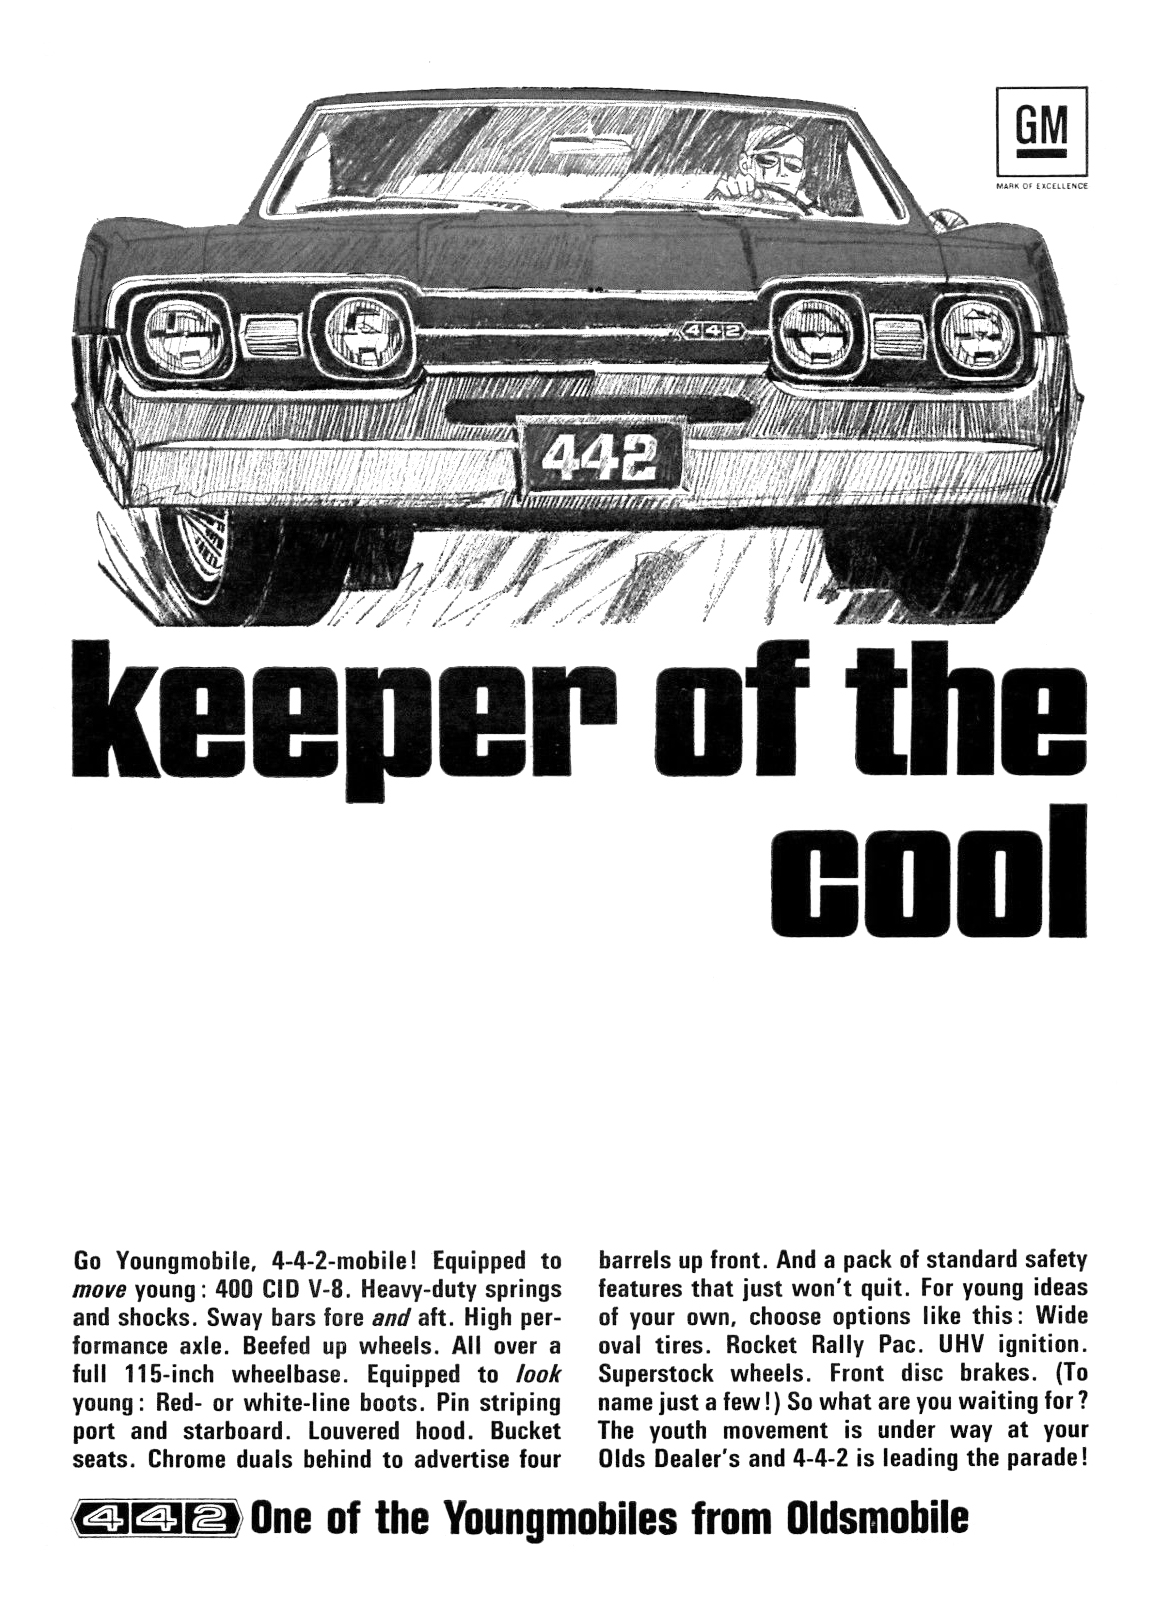 Oldsmobile 442 Ad (June, 1967): Keeper of the cool